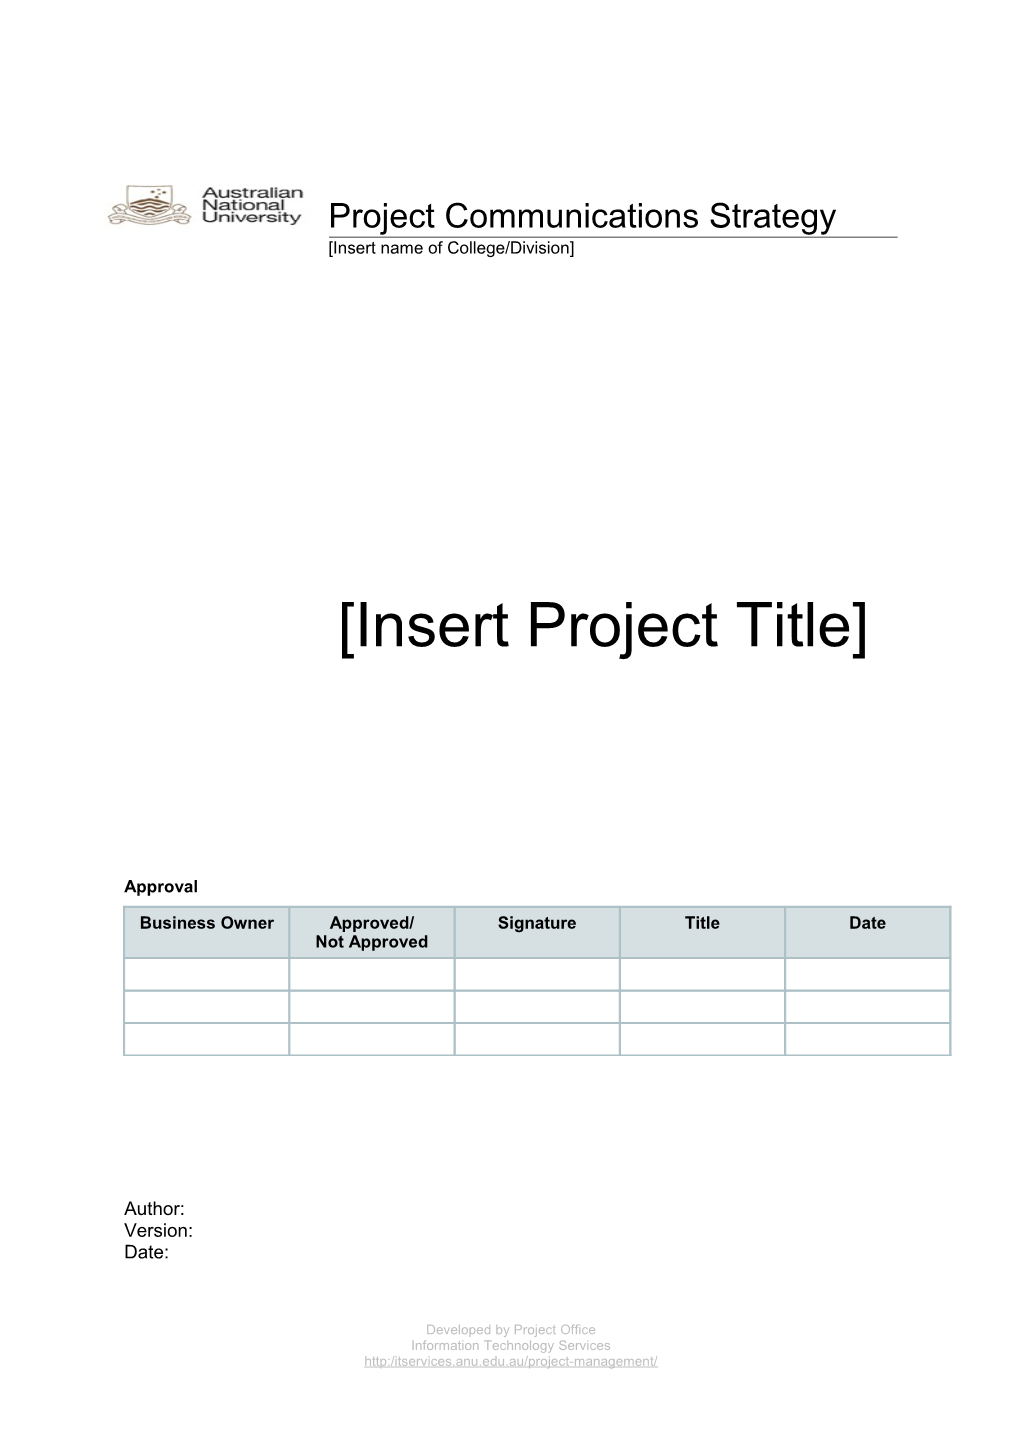 PROJECT COMMUNICATIONS STRATEGY Insert Project Title